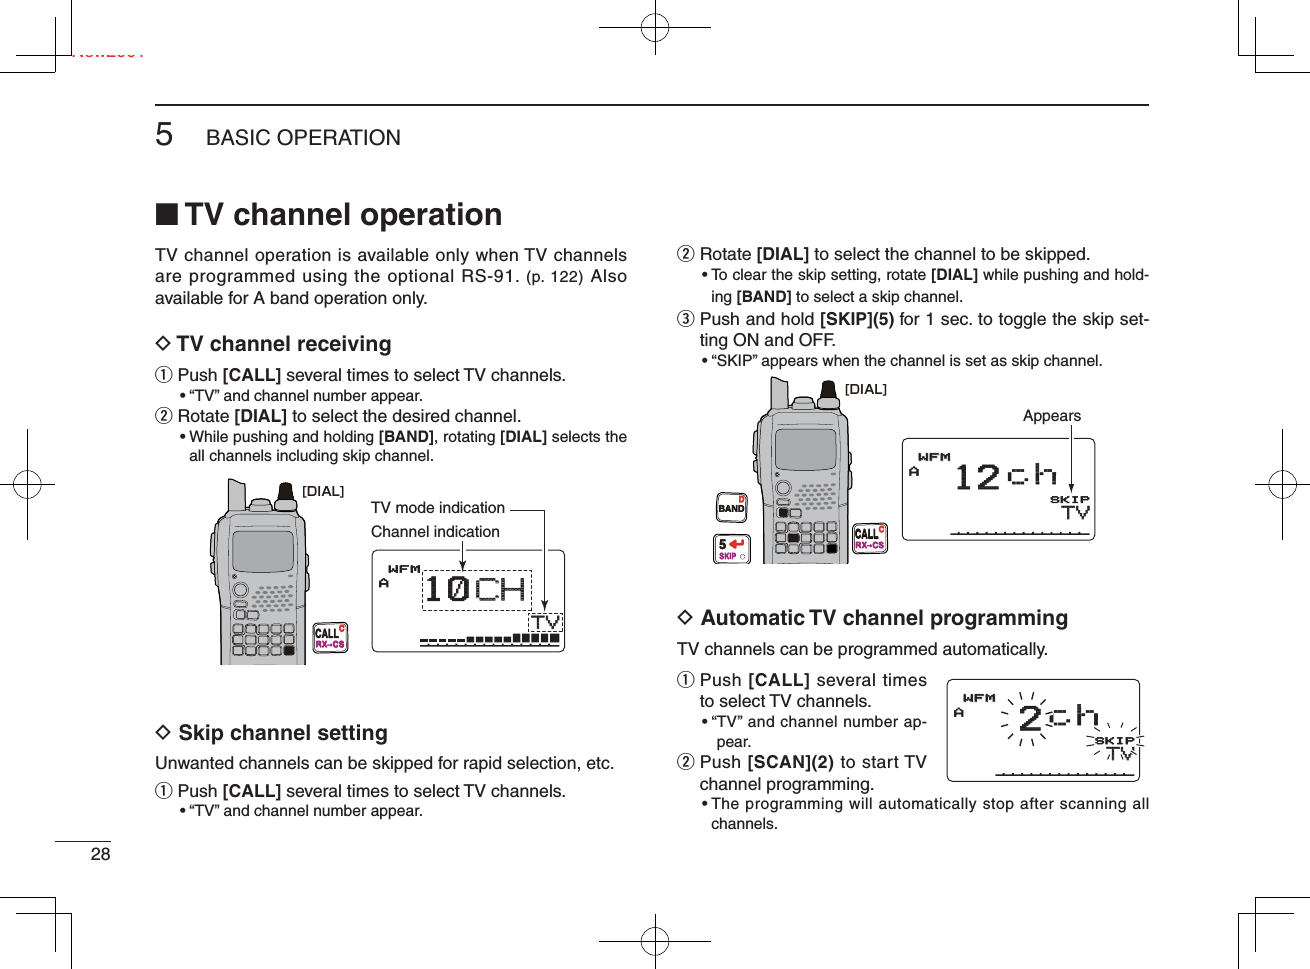 285BASIC OPERATIONNew2001■ TV channel operationTV channel operation is available only when TV channels are programmed using the optional RS-91. (p. 122) Also available for A band operation only.D TV channel receivingq  Push [CALL] several times to select TV channels. • “ TV” and channel number appear.w  Rotate [DIAL] to select the desired channel. •  While pushing and holding [BAND], rotating [DIAL] selects the all channels including skip channel.D Skip channel settingUnwanted channels can be skipped for rapid selection, etc.q  Push [CALL] several times to select TV channels.  • “TV” and channel number appear.w  Rotate [DIAL] to select the channel to be skipped. •  To clear the skip setting, rotate [DIAL] while pushing and hold-ing [BAND] to select a skip channel.e  Push and hold [SKIP](5) for 1 sec. to toggle the skip set-ting ON and OFF. •  “SKIP” appears when the channel is set as skip channel.D Automatic TV channel programmingTV channels can be programmed automatically. q  Push [CALL] several times to select TV channels. • “ TV” and channel number ap-pear.w   Push [SCAN](2) to start TV channel programming. •  The programming will automatically stop after scanning all channels.[DIAL]CALLRX  CSCTVTVAMemoNameMemoNameμPRIOPRIO WXWX EMREMRDTCSDTCSWFMLOWLOWATTATT10CHCHPSKIP+DUP+DUP2525TV mode indicationChannel indication[DIAL]BANDD5SKIPCALLRX  CSCTVTVAMem oNameMemoNameµPRIOPRIOWXWXEMREM RDTCSDTCSWFMWFMLOWLO WAT TATT12 chPSKIP+DUP+DU P2525AppearsTVTVAMem oNameMemoNameµPRIOPRIOWXWXEMREM RDTCSDTCSWFMWFMLOWLO WAT TATT2chPSKIP+DUP+DUP2525